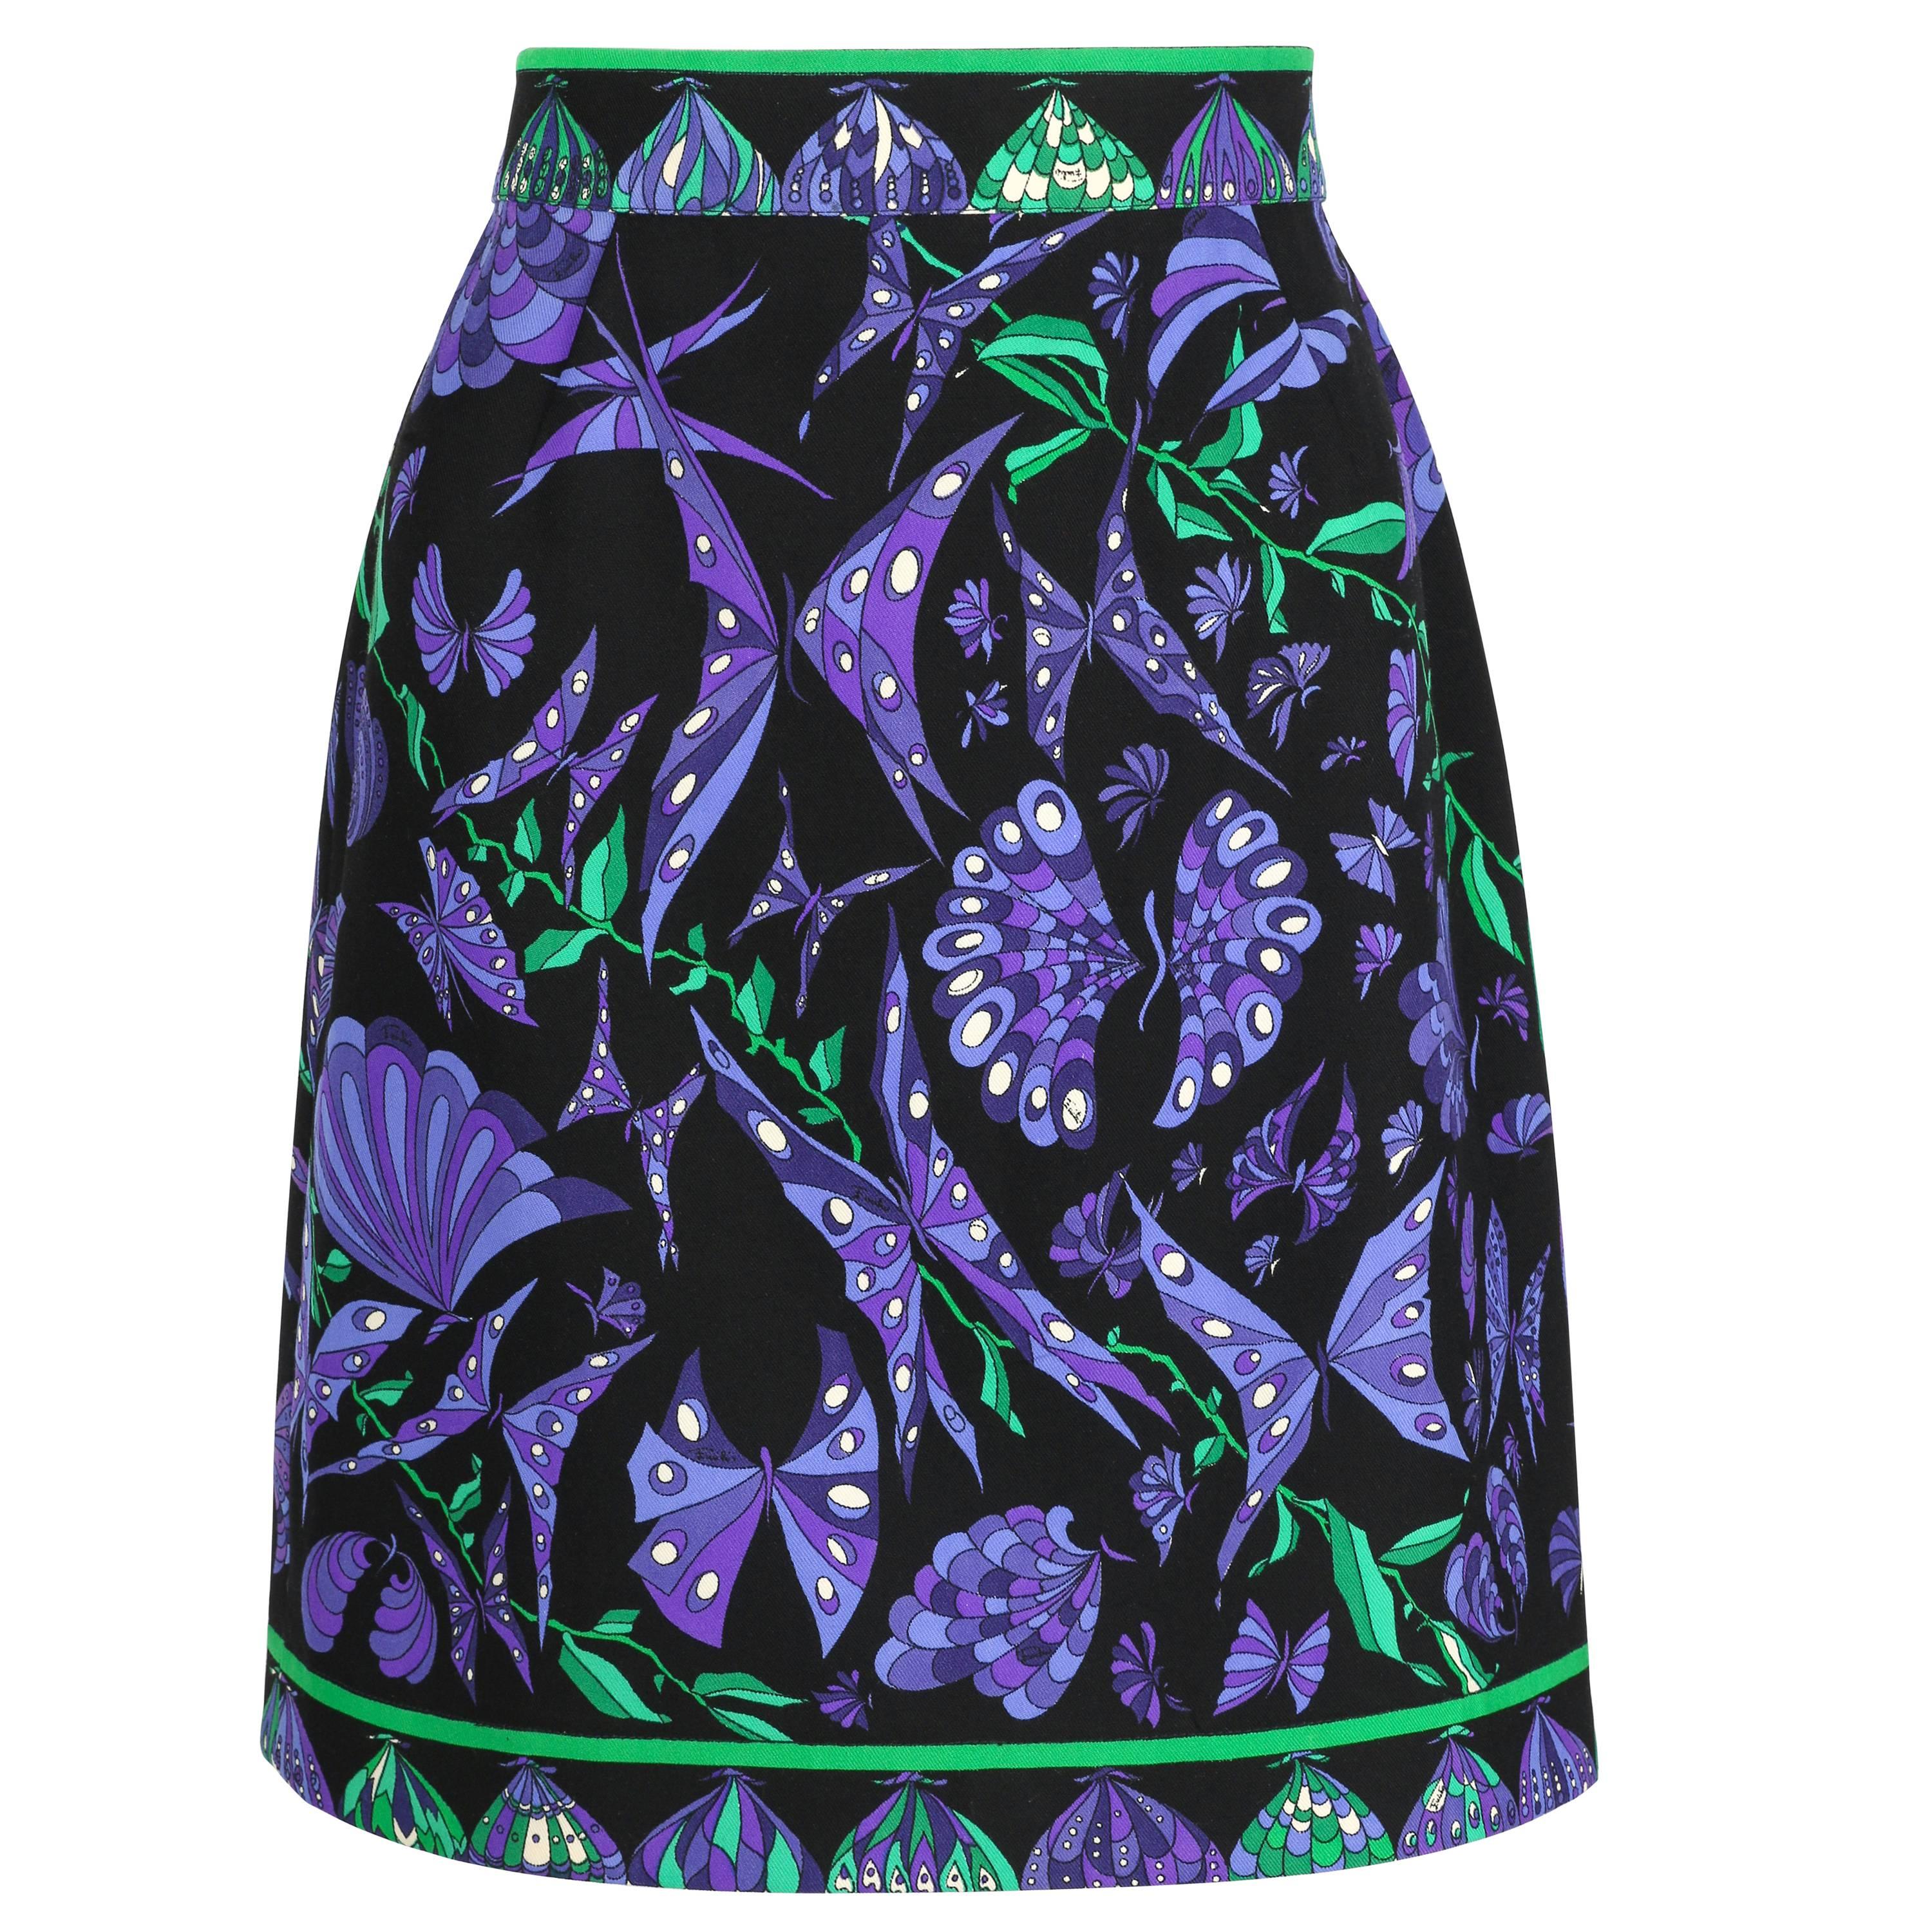 EMILIO PUCCI c.1970's Black Purple Butterfly Signature Print Wool A-Line Skirt